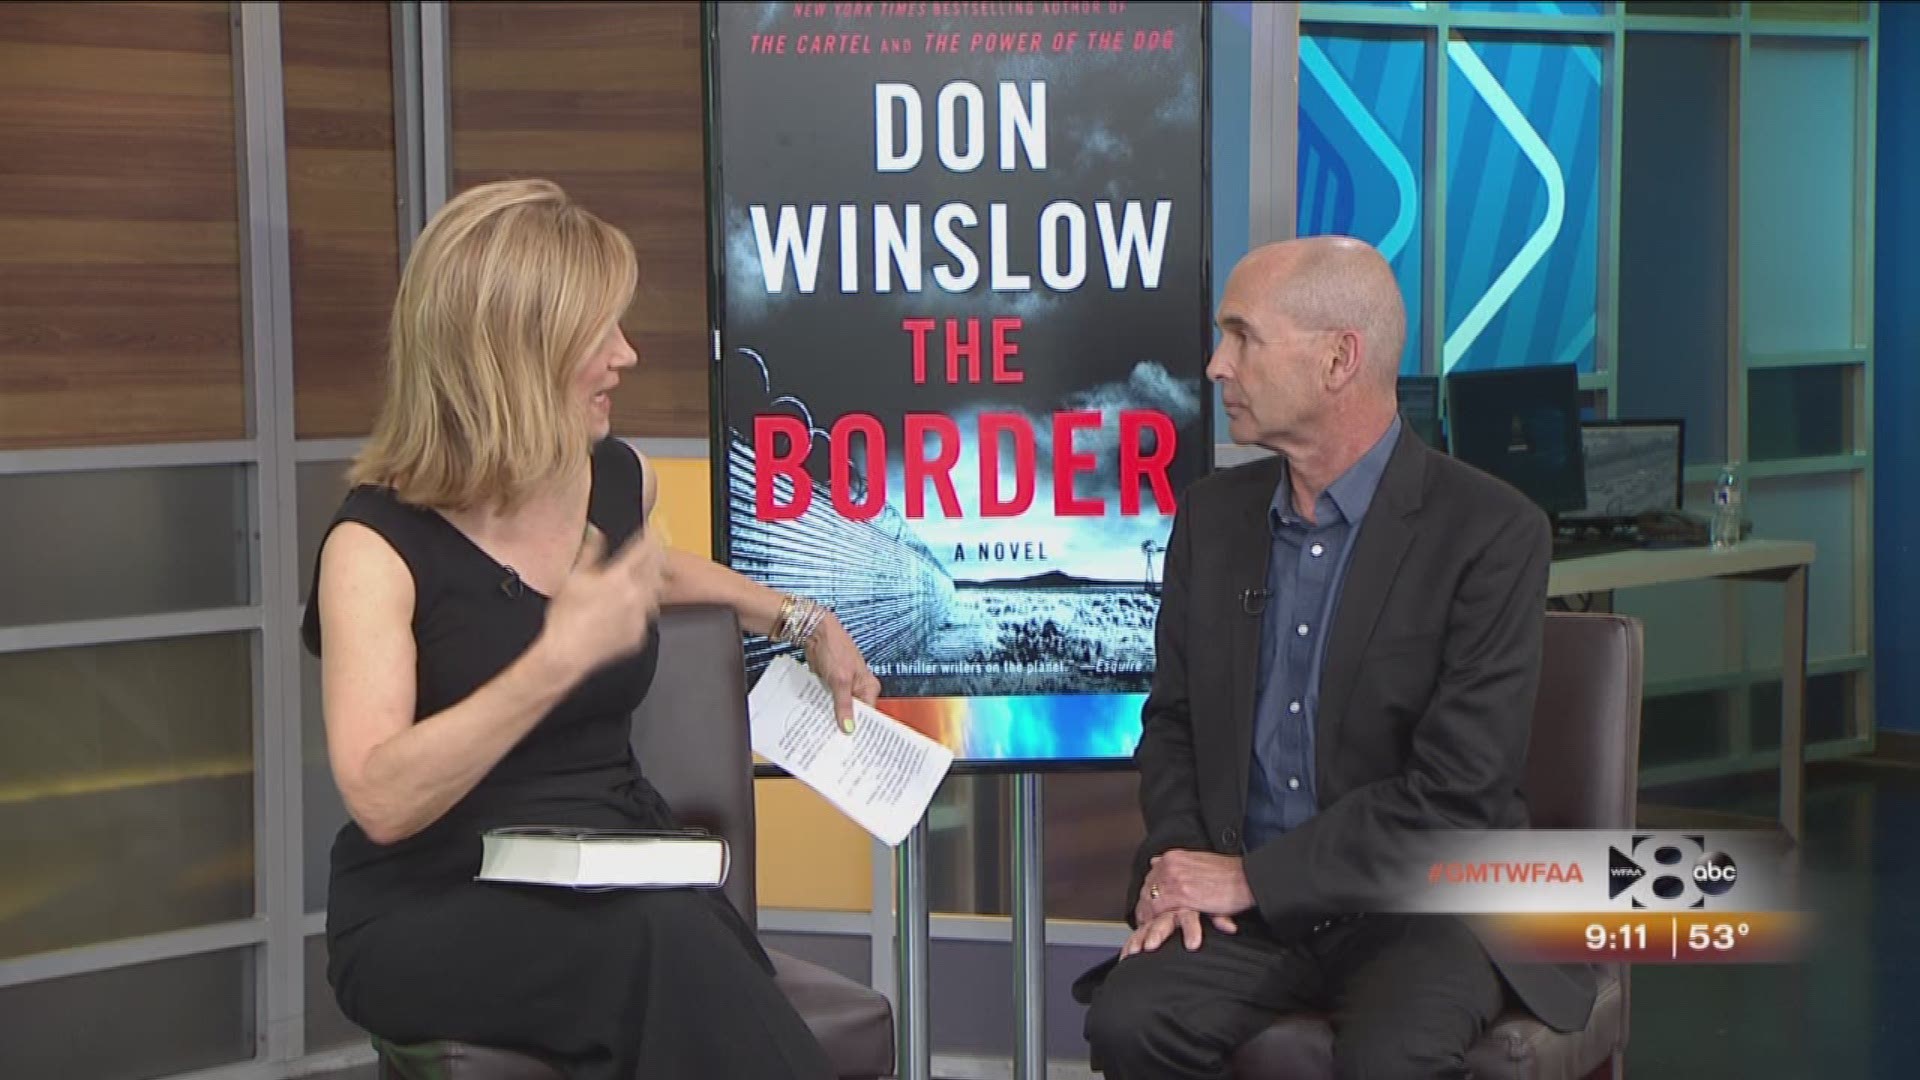 Author Don Winslow discusses the latest book in his "Cartel" Trilogy.